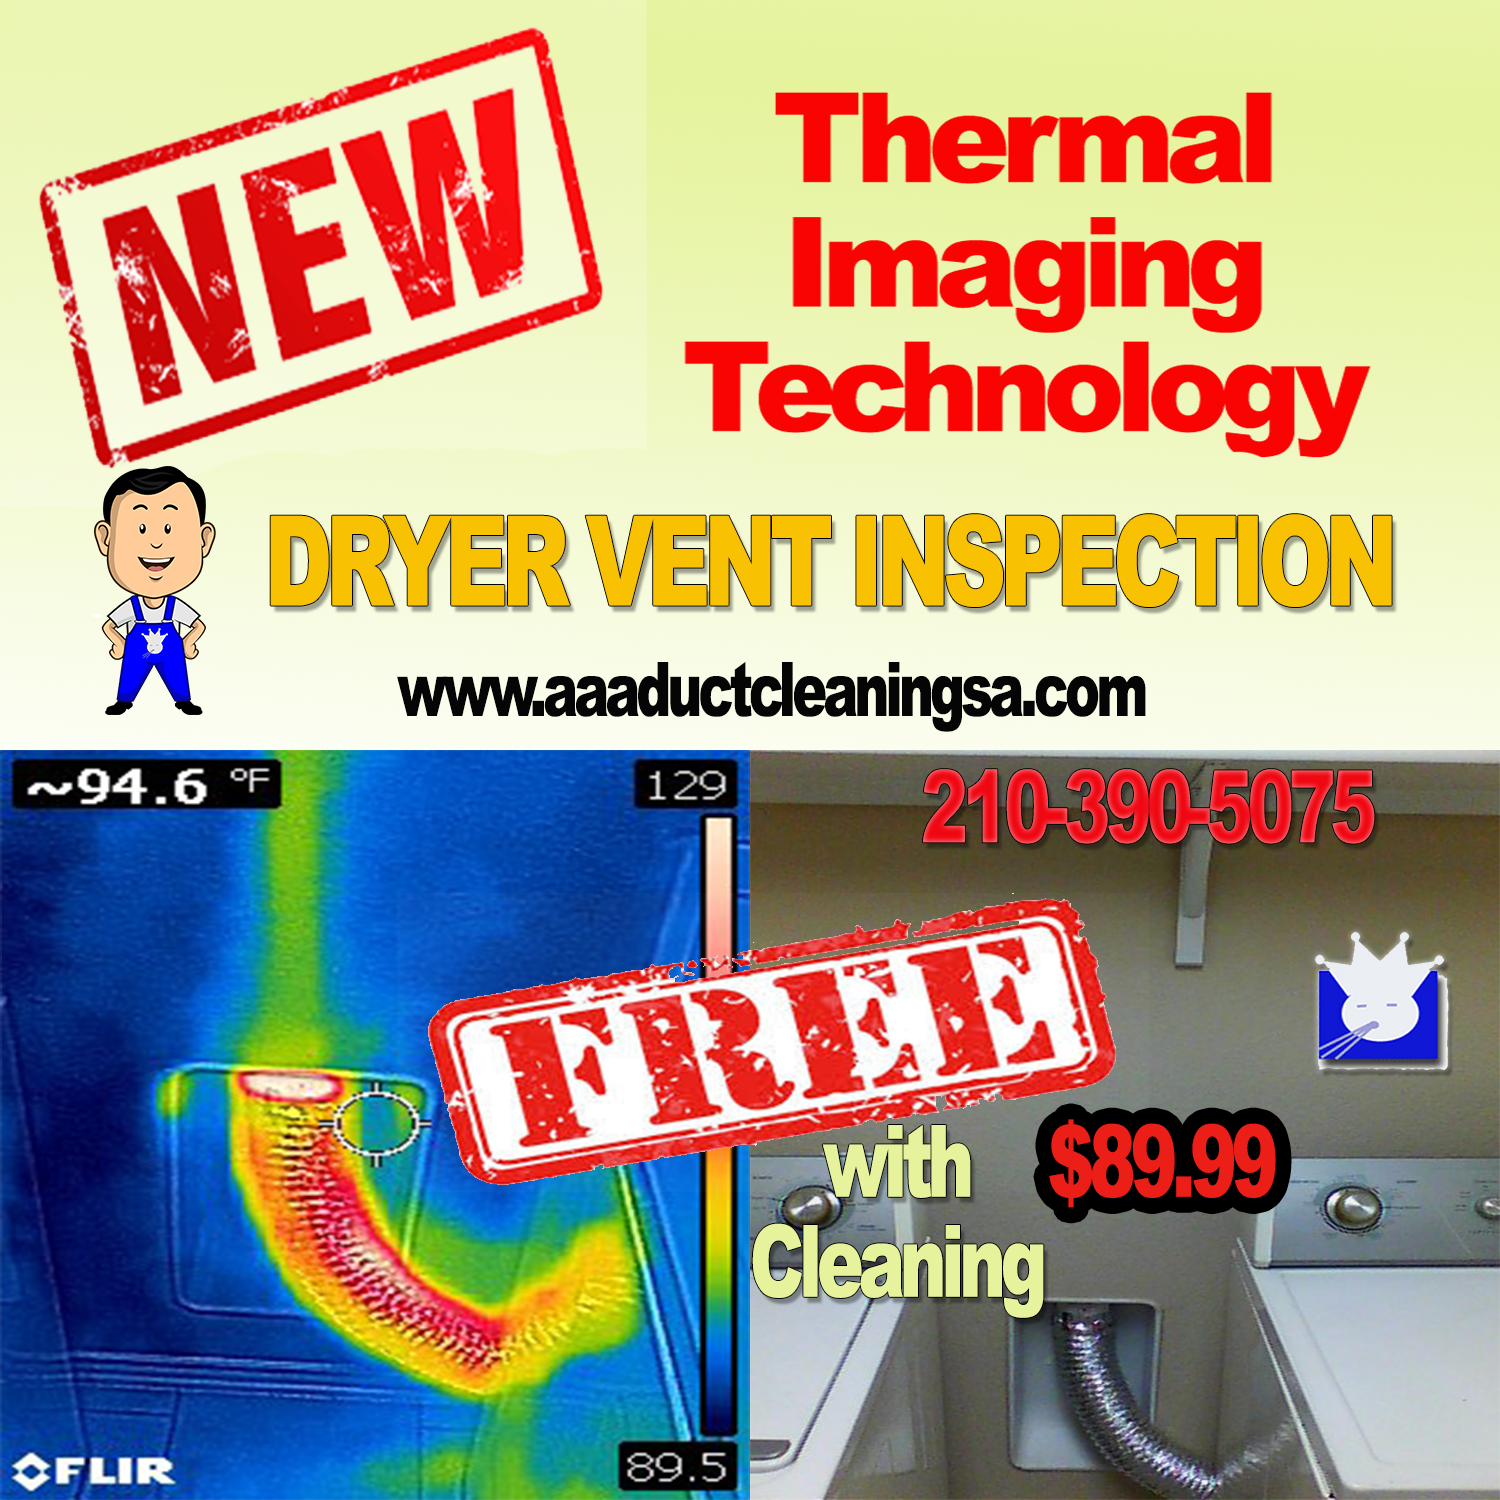  AAA Duct Cleaning provides dryer vent duct inspections and dryer vent cleaning services San Antonio for 89.99. Our dryer vent cleaning service provides customers with free thermal imaging of their dryer vent San Antonio. Dryer vent thermal imaging helps customers and technicians better understand what is going on with their dryer vent and how the duct is exhausting heat.San Antonio if your dryer vent is showing signs of collecting too much let contact AAA Duct Cleaning at 210-390-5075 to schedule your next professional dryer vent cleaning.